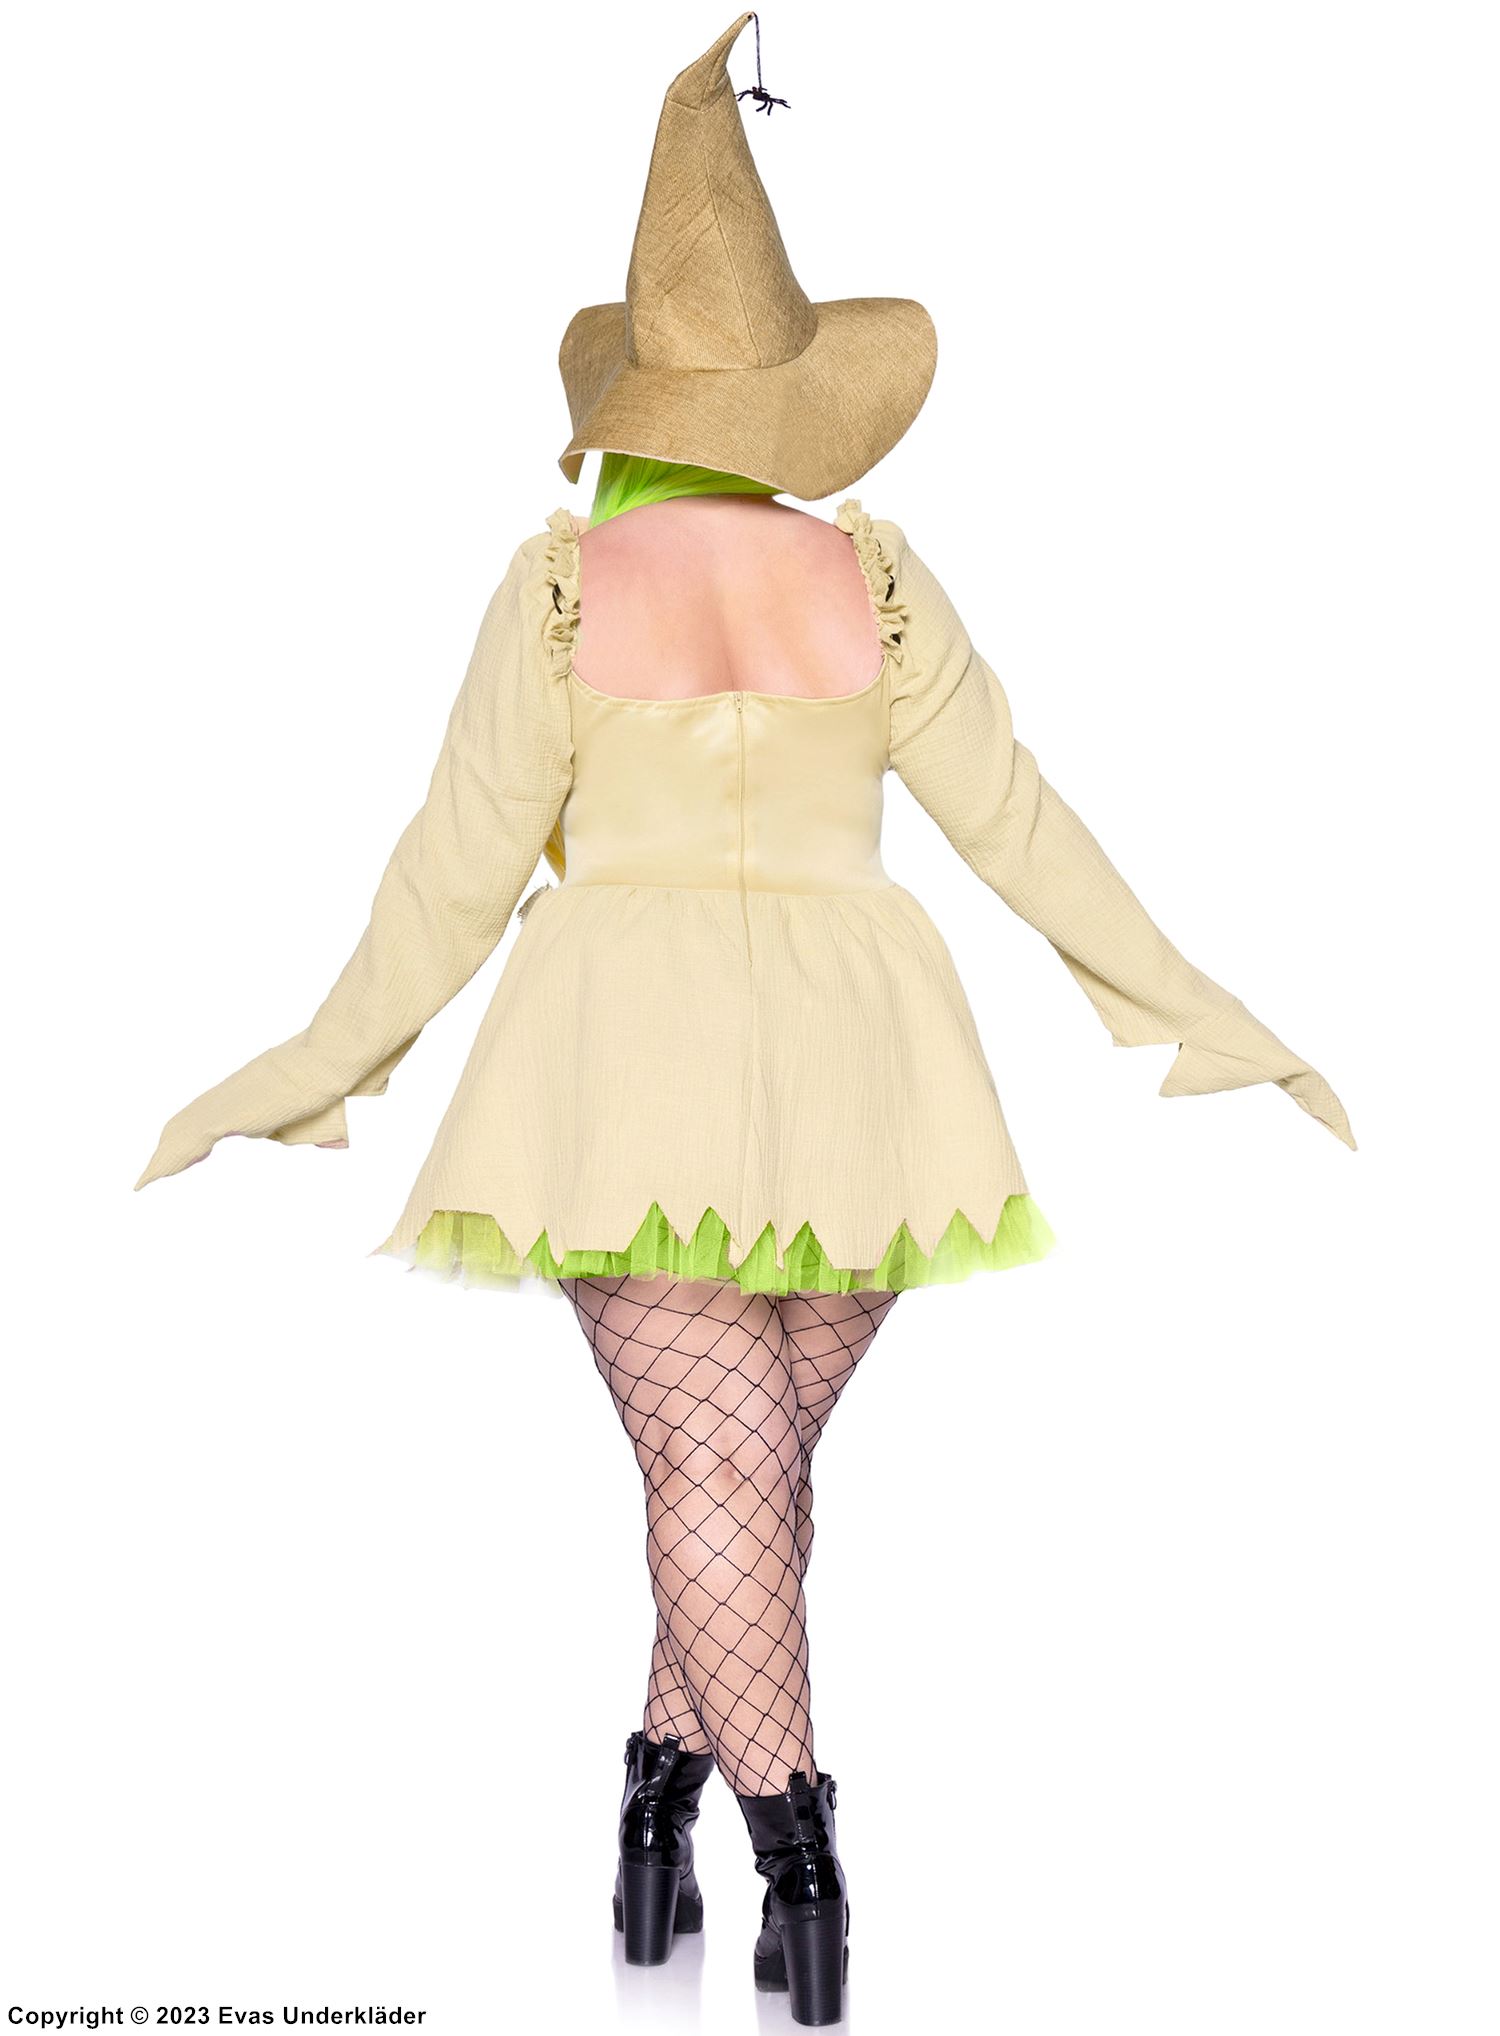 Female Oogie Boogie from Nightmare Before Christmas, costume dress, lacing, tatters, spiders, plus size